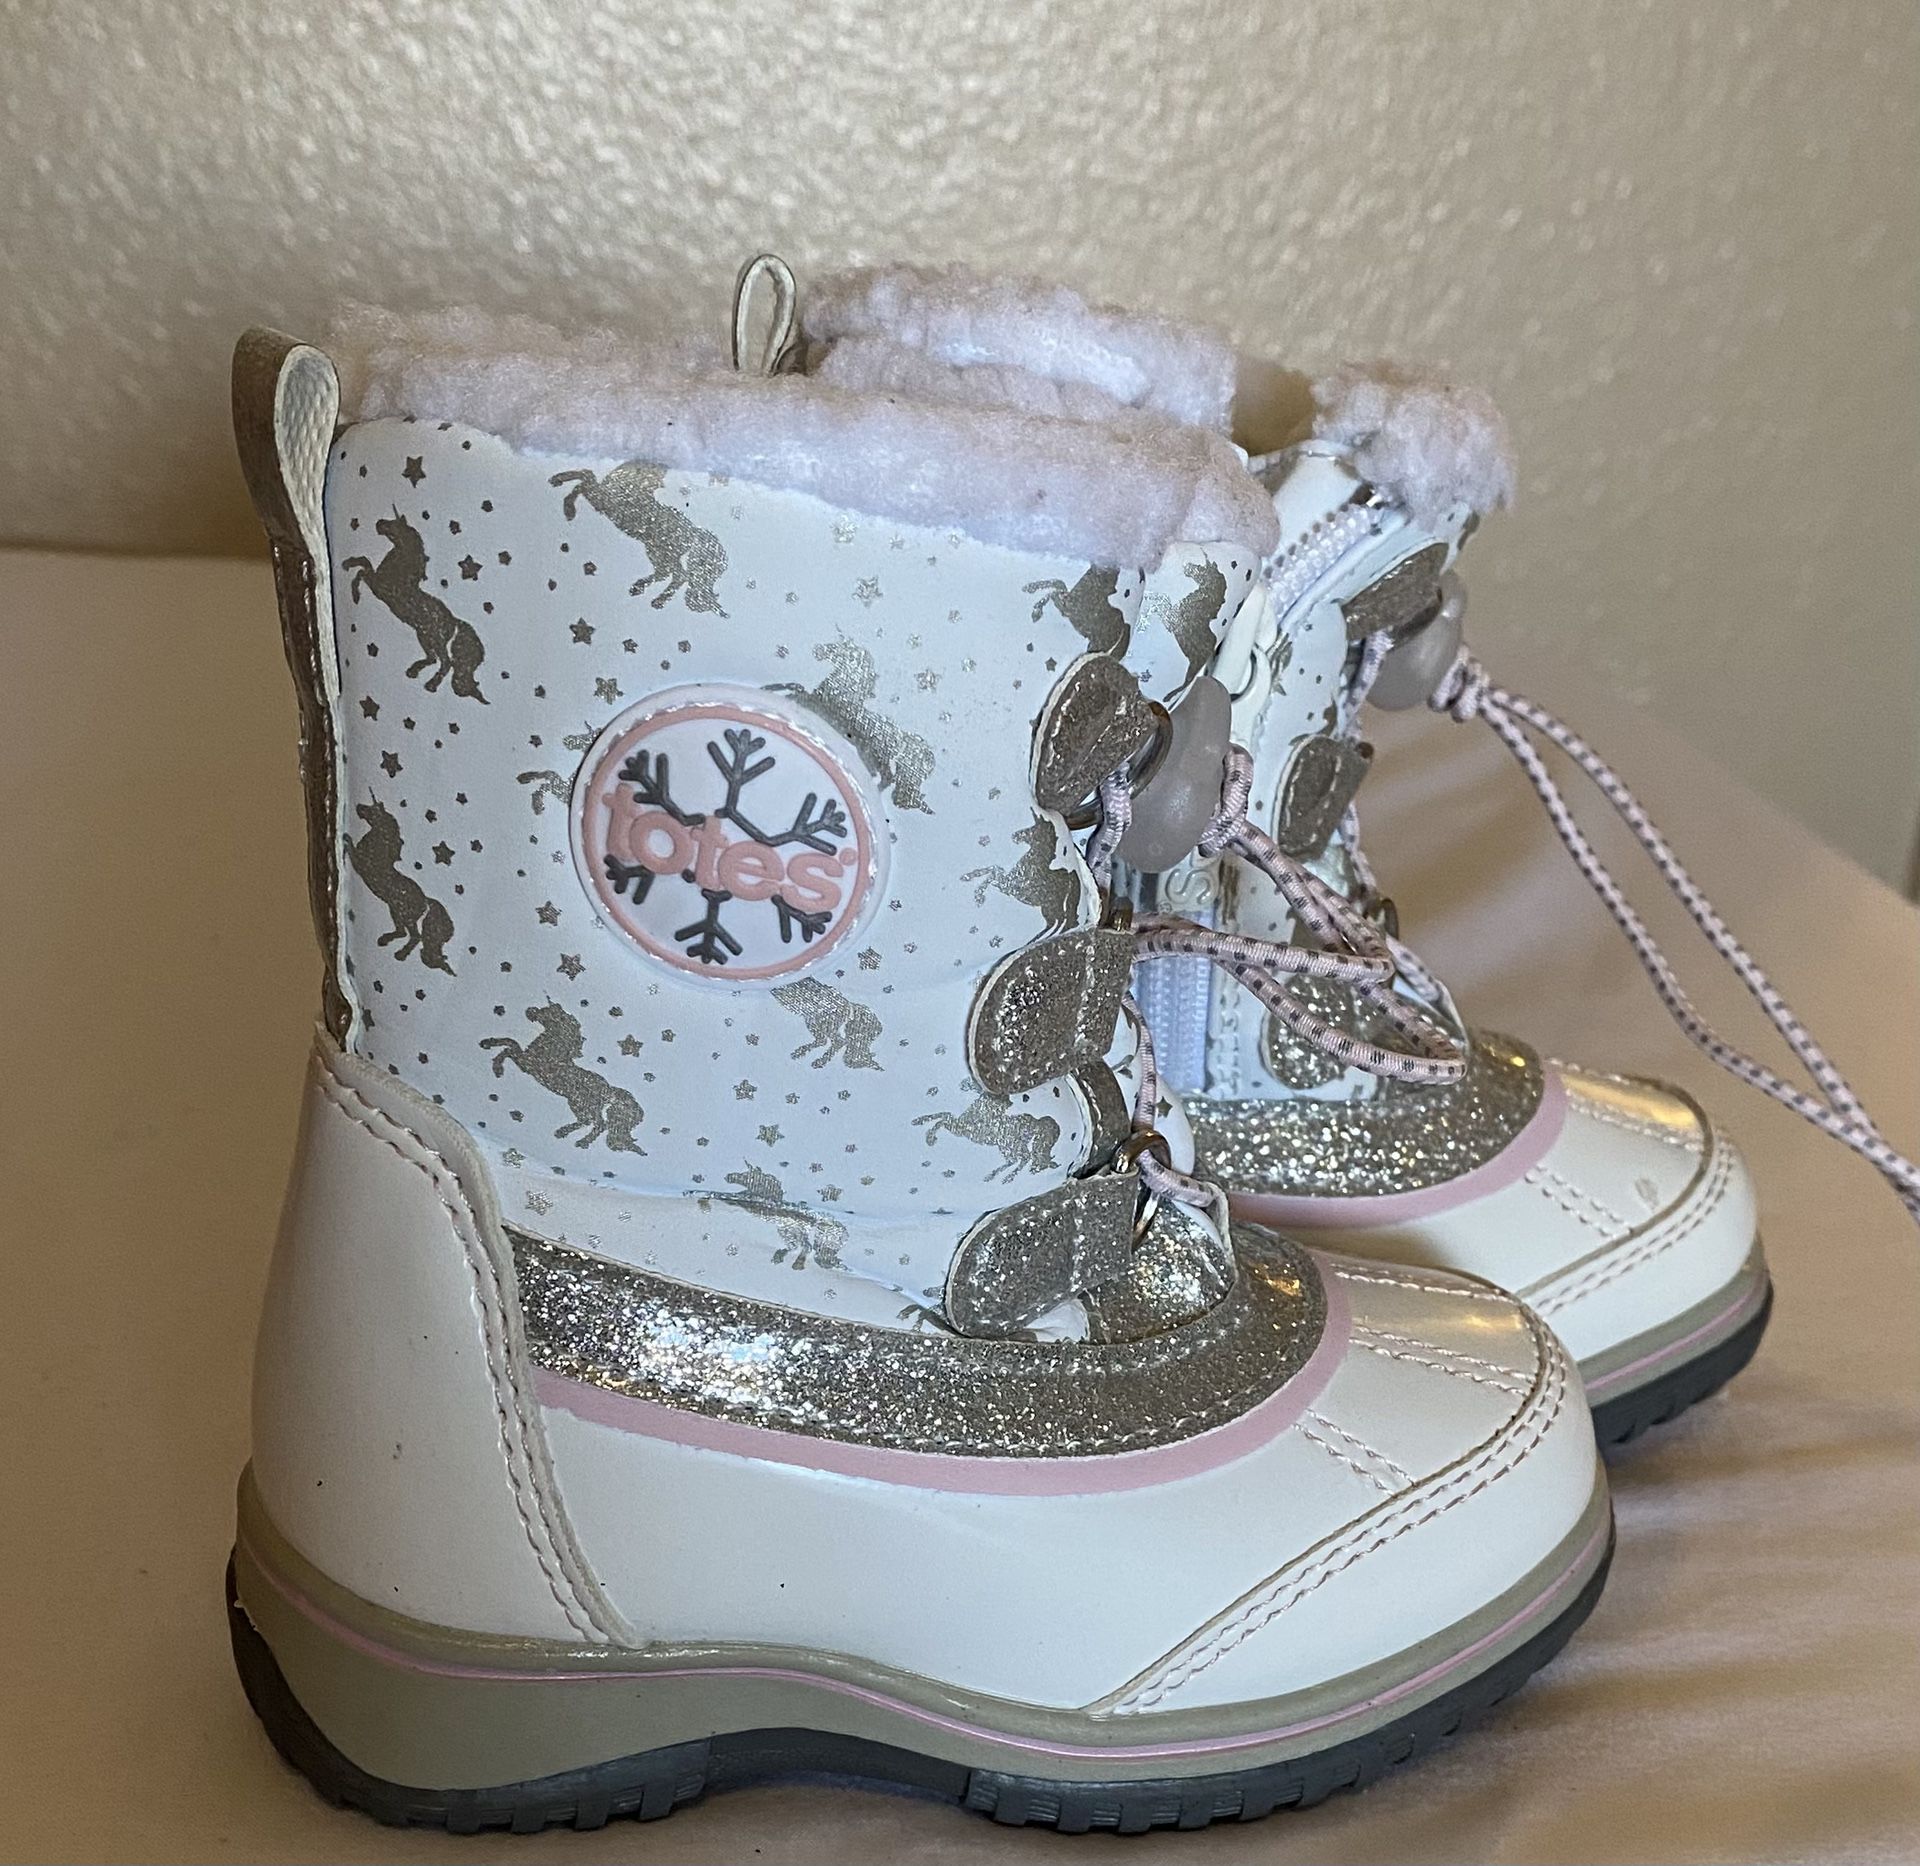 Totes Snow Boots 